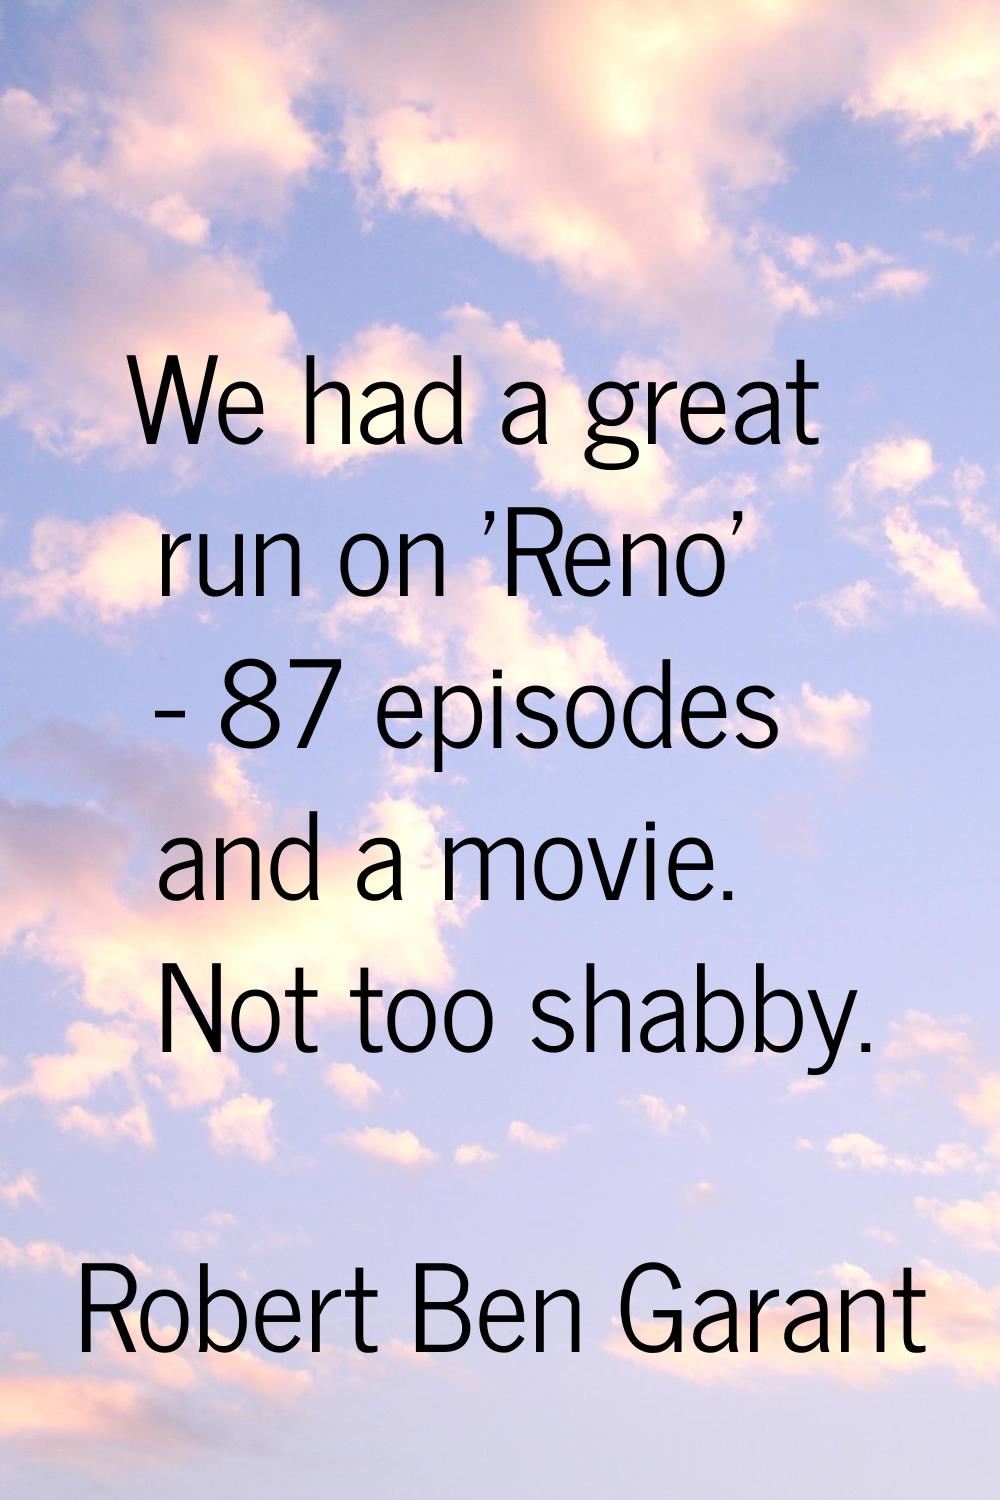 We had a great run on 'Reno' - 87 episodes and a movie. Not too shabby.